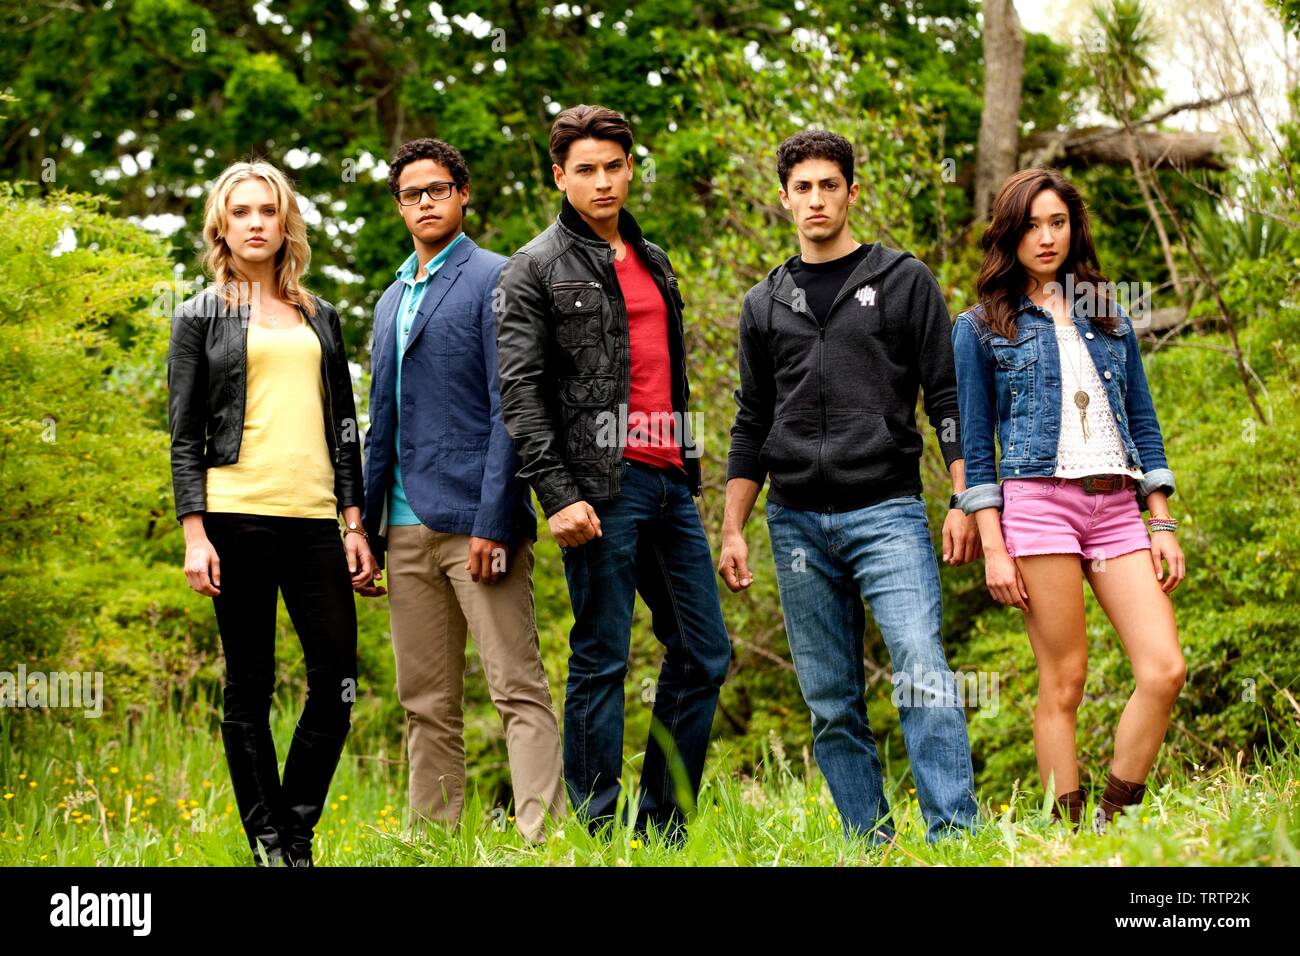 https://c8.alamy.com/comp/TRTP2K/azim-rizk-ciara-hanna-masterson-christina-john-mark-loudermilk-and-andrew-mcgray-in-power-rangers-megaforce-tv-2013-copyright-editorial-use-only-no-merchandising-or-book-covers-this-is-a-publicly-distributed-handout-access-rights-only-no-license-of-copyright-provided-only-to-be-reproduced-in-conjunction-with-promotion-of-this-film-TRTP2K.jpg